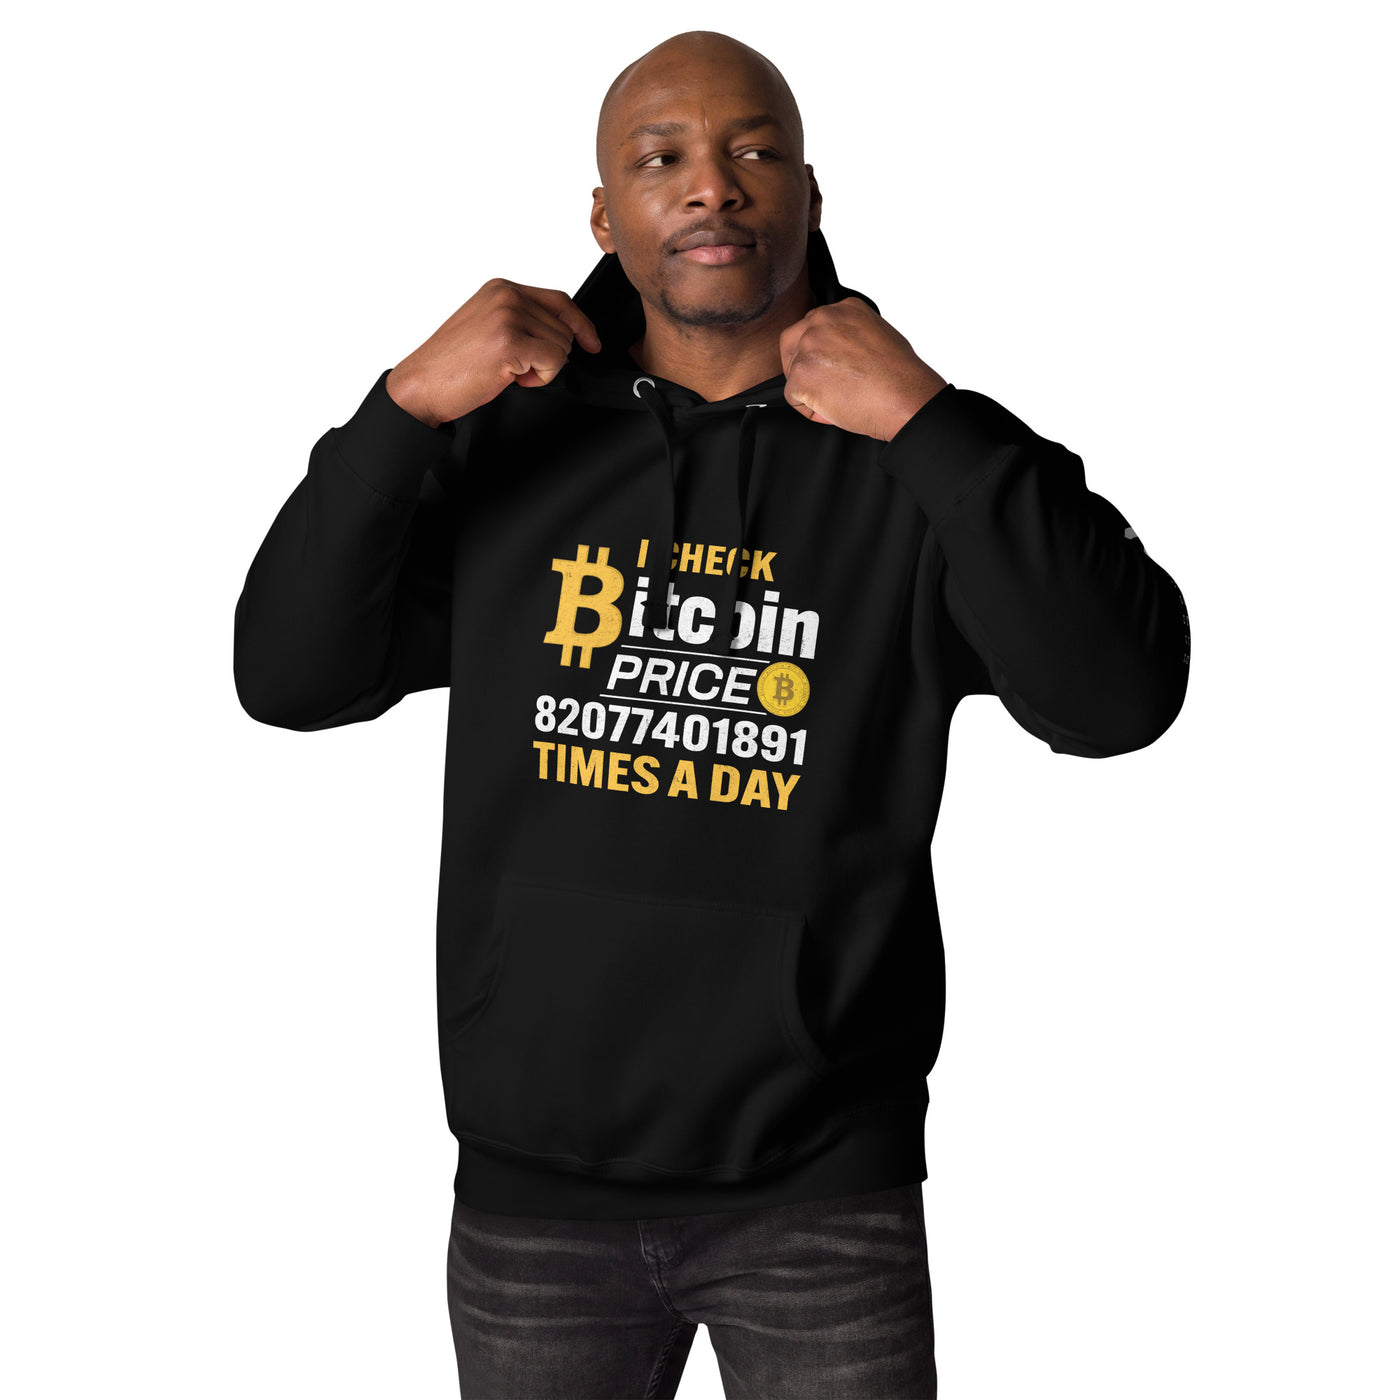 I check Bitcoin Price 82077401891 times a day - Unisex Hoodie